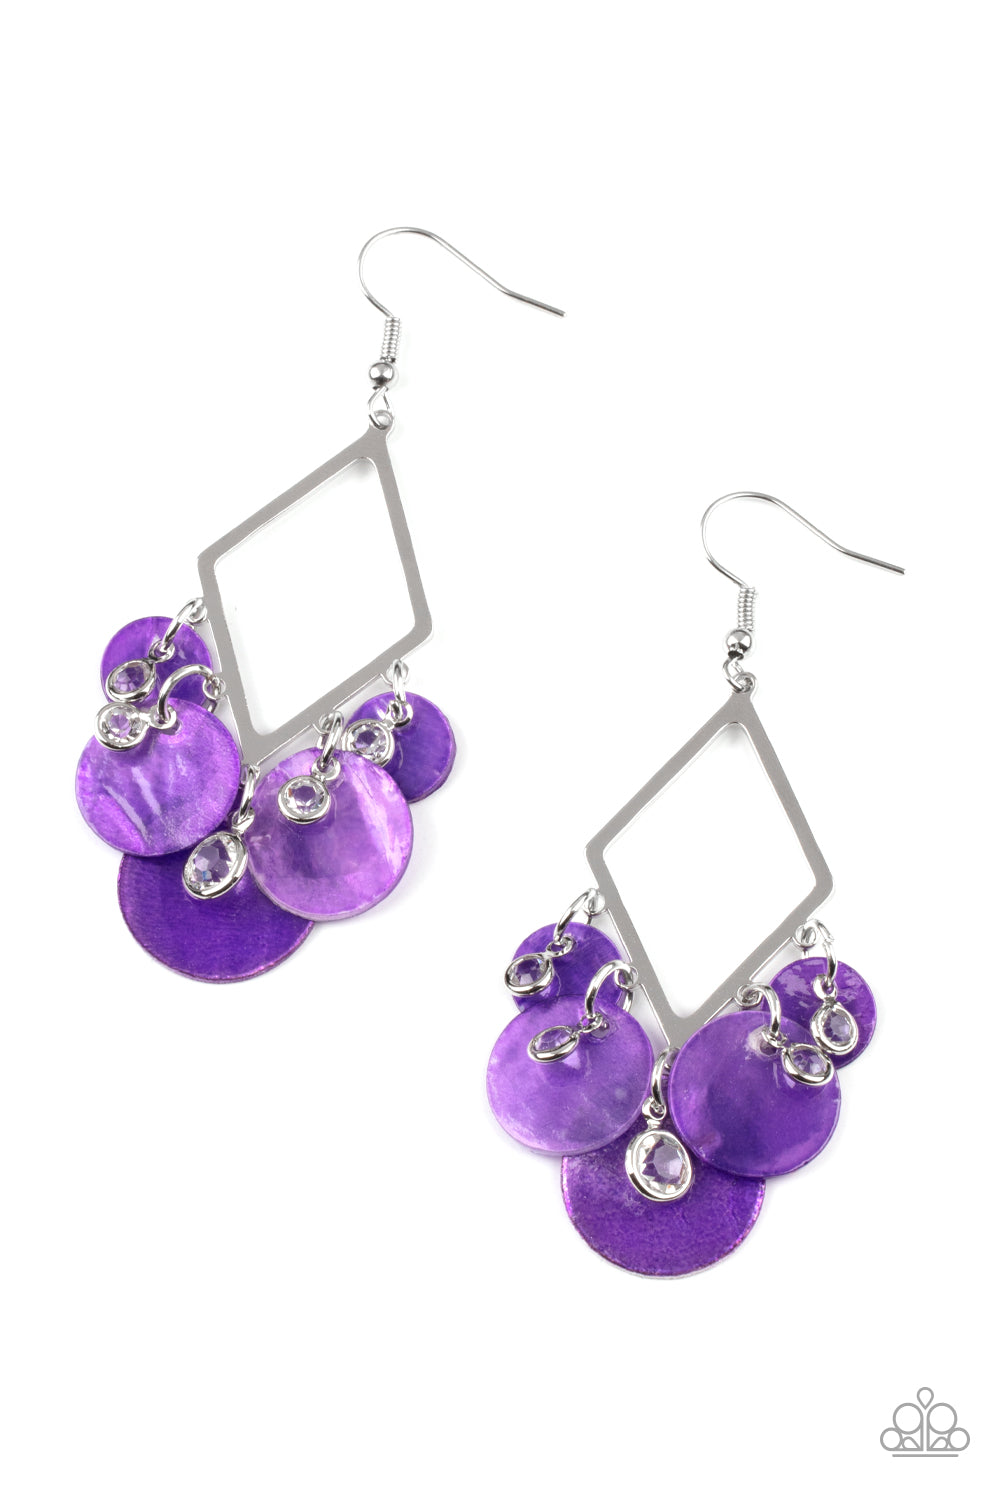 Paparazzi Pomp And Circumstance - Purple Earrings - A Finishing Touch Jewelry